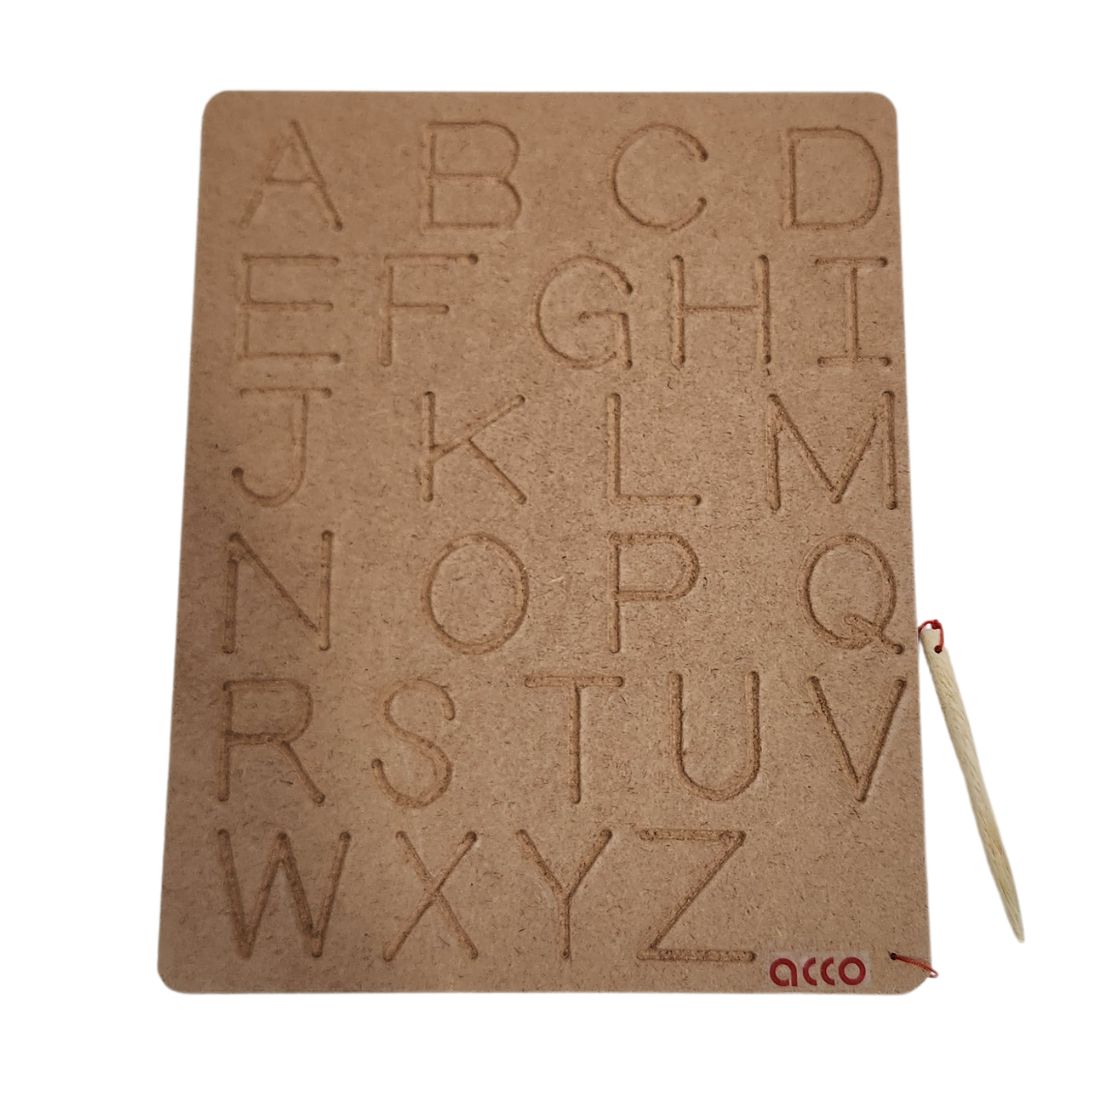 acco Tracing Wooden Board For Kids